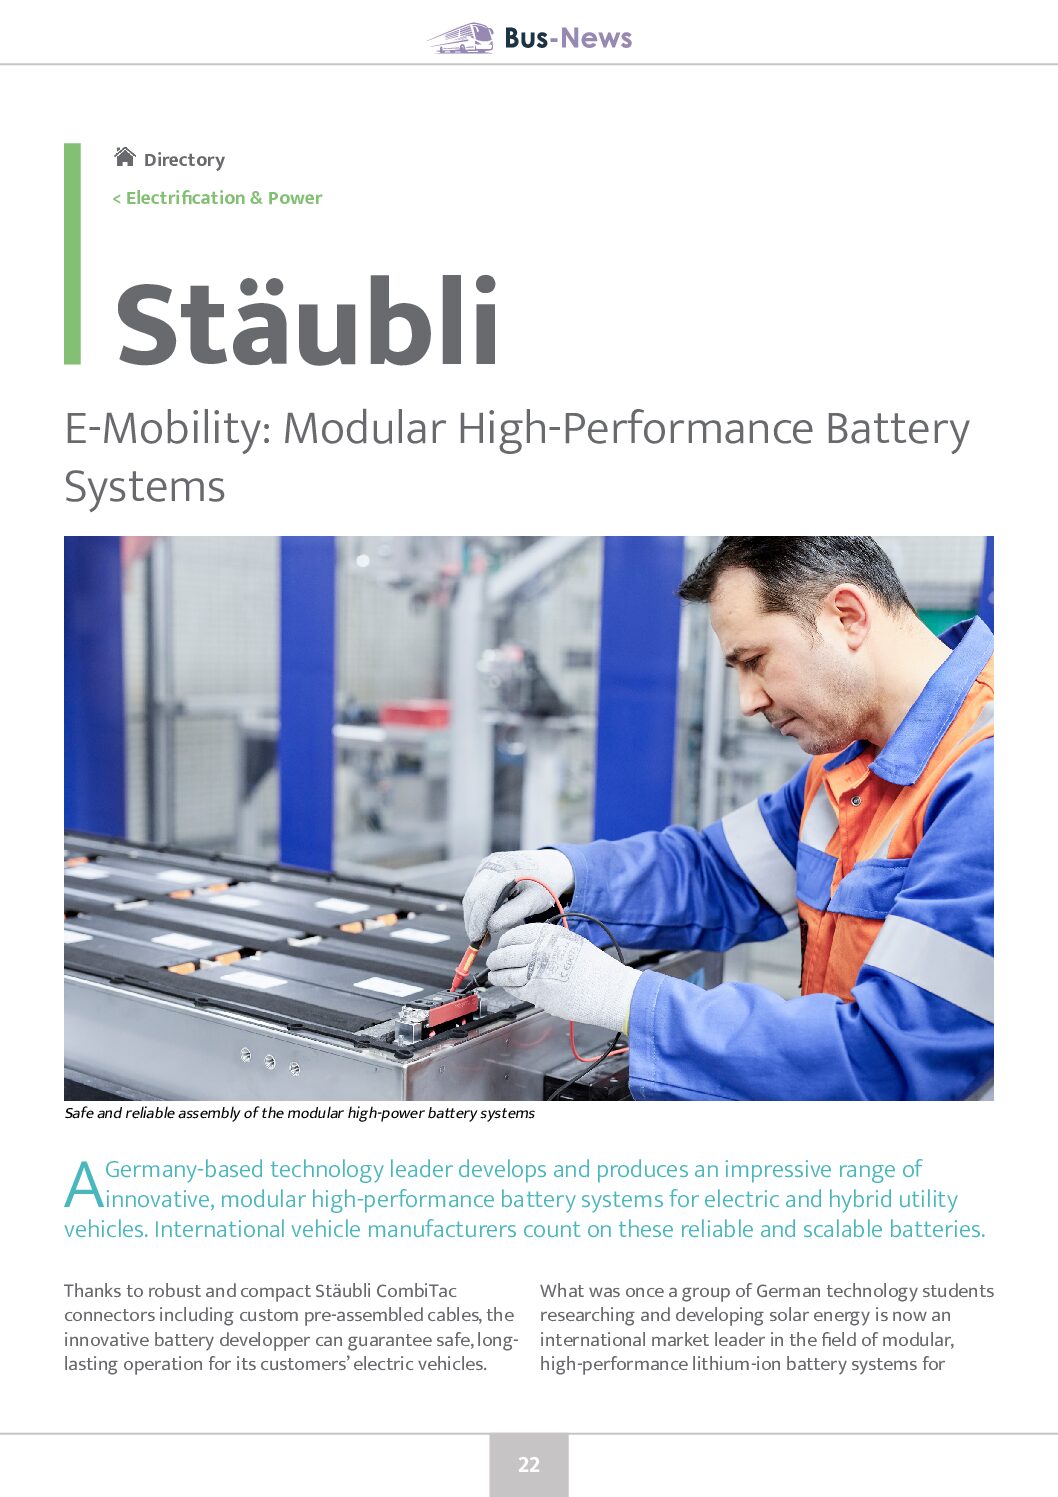 E-Mobility: Modular High-Performance Battery Systems